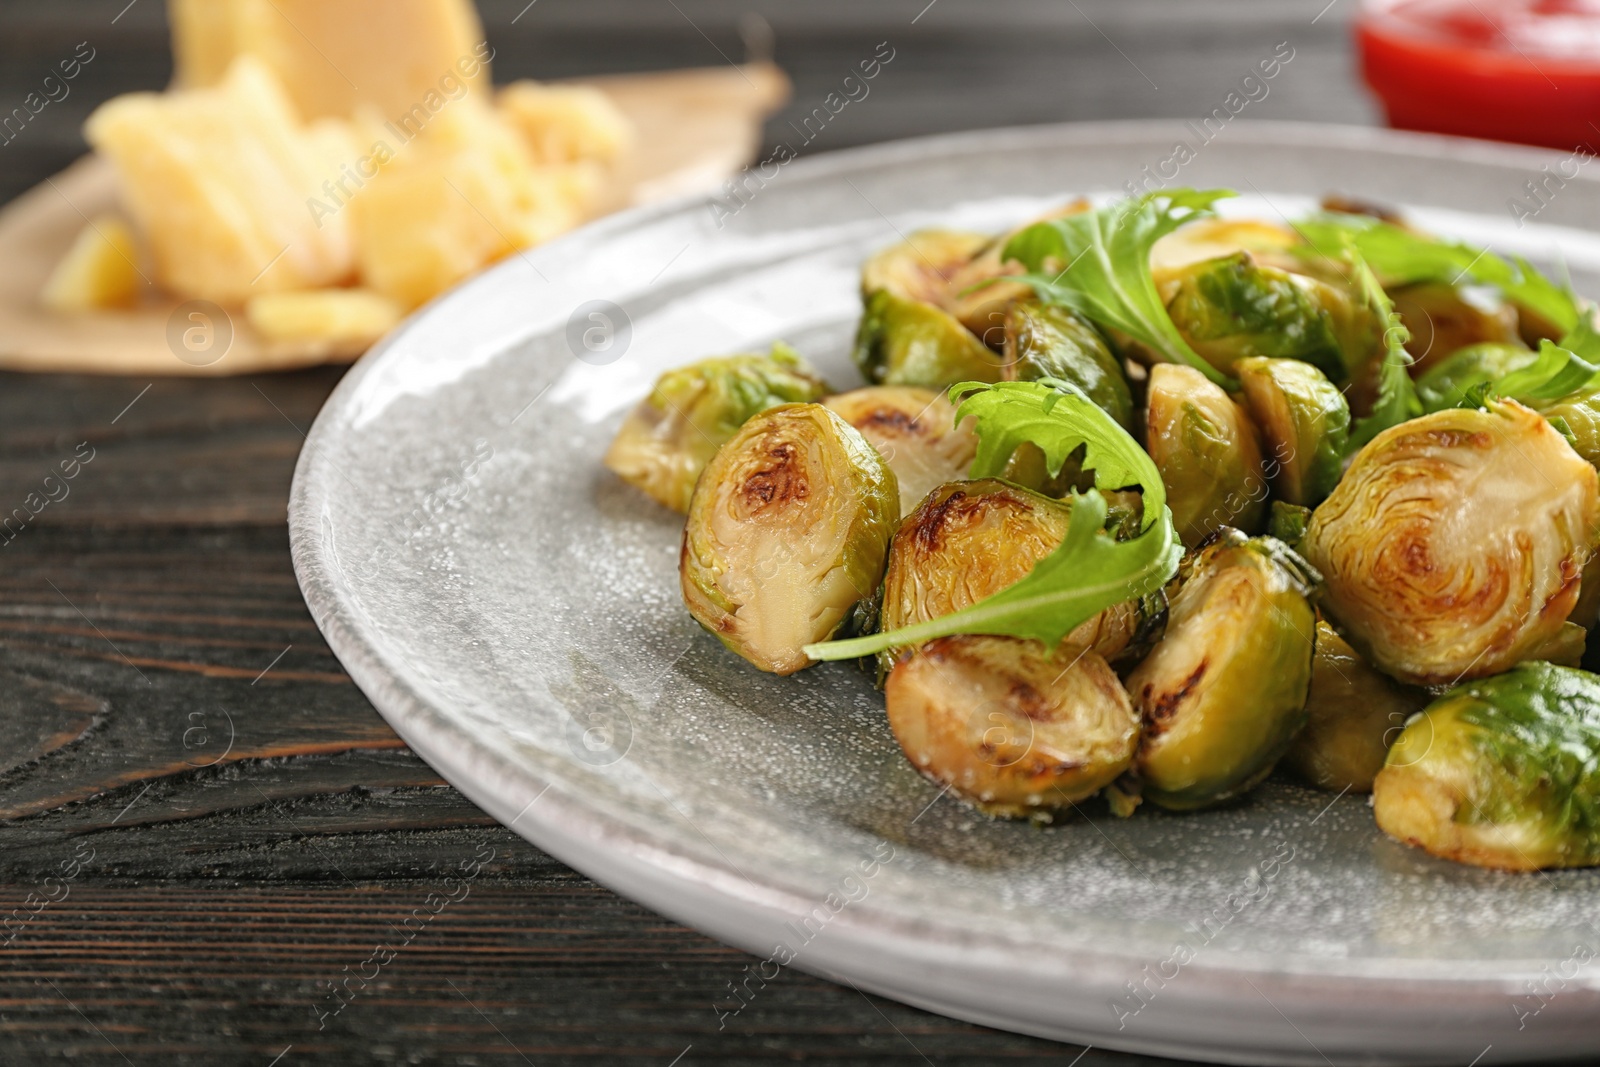 Photo of Delicious roasted brussels sprouts with arugula on table, closeup